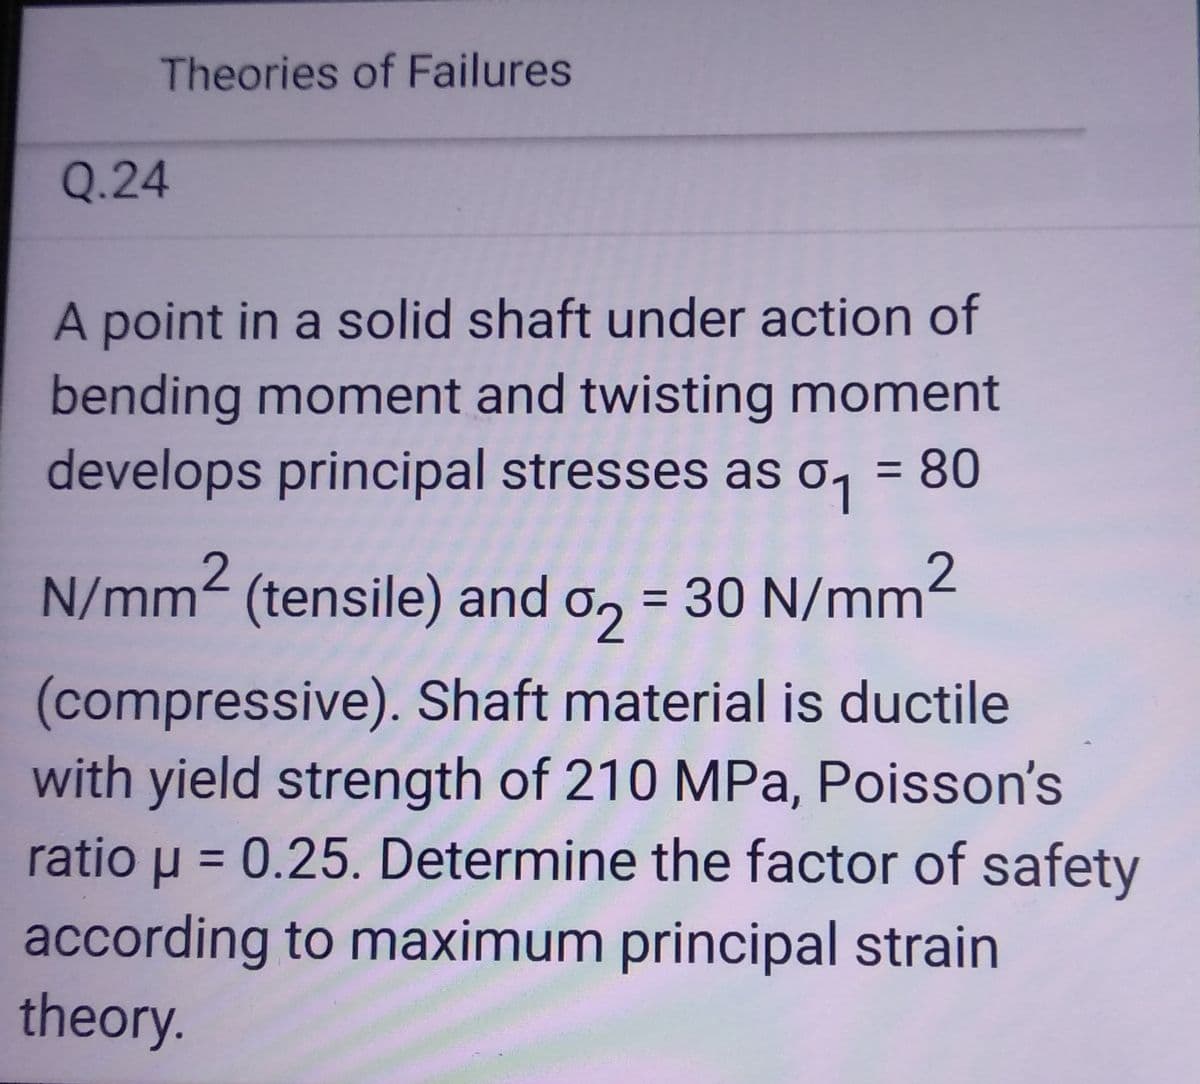 Theories of Failures
Q.24
A point in a solid shaft under action of
bending moment and twisting moment
develops principal stresses as a₁ = 80
o
N/mm² (tensile) and 2 = 30 N/mm²
(compressive). Shaft material is ductile
with yield strength of 210 MPa, Poisson's
ratio μ = 0.25. Determine the factor of safety
according to maximum principal strain
theory.